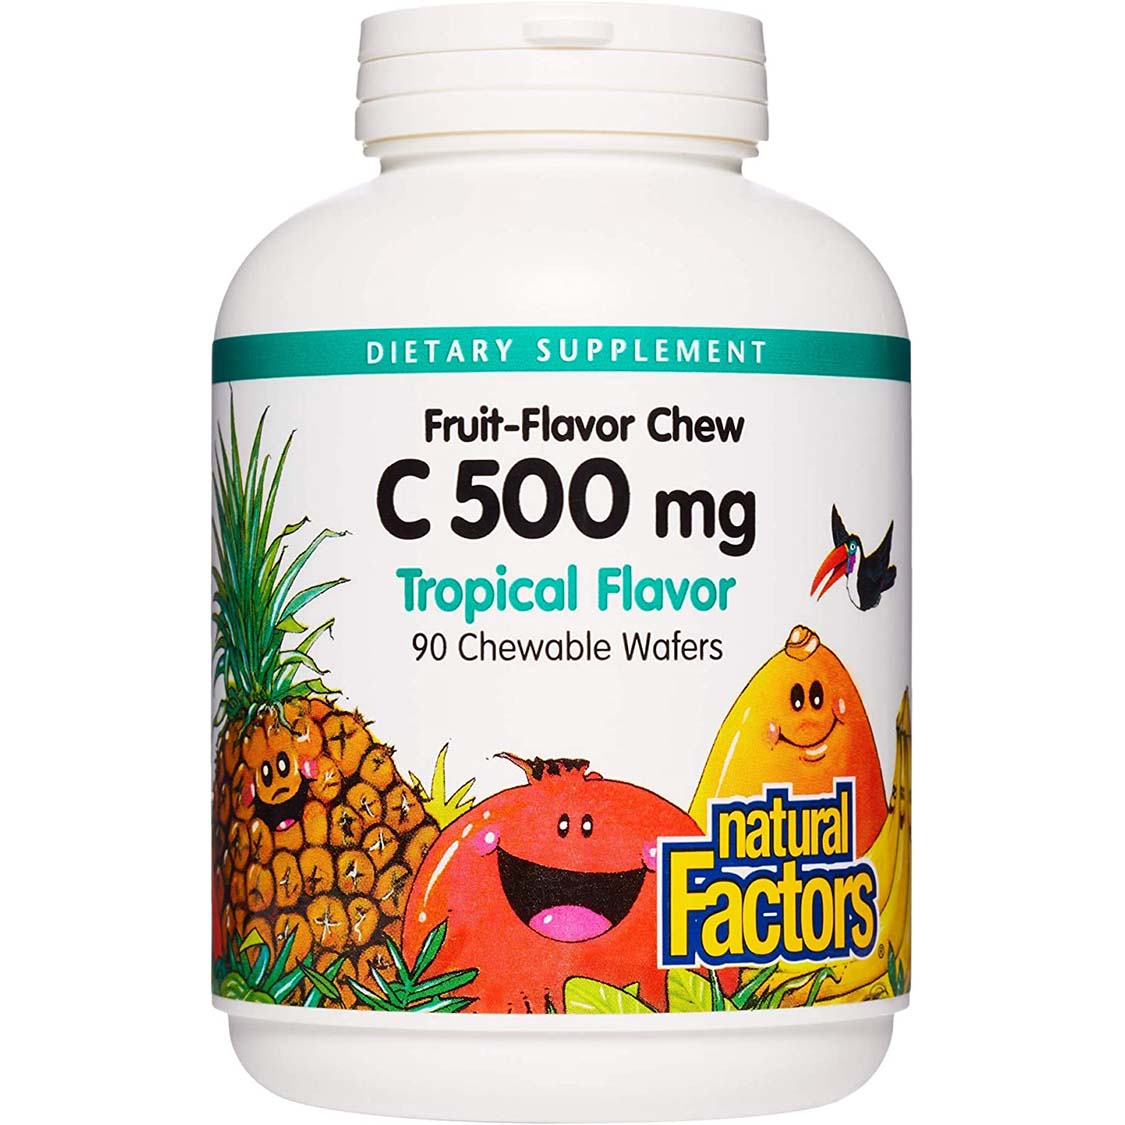 Natural Factors Vitamin C 500 mg Chewable Wafer, Tropical Flavor, 90 Chewable Wafer